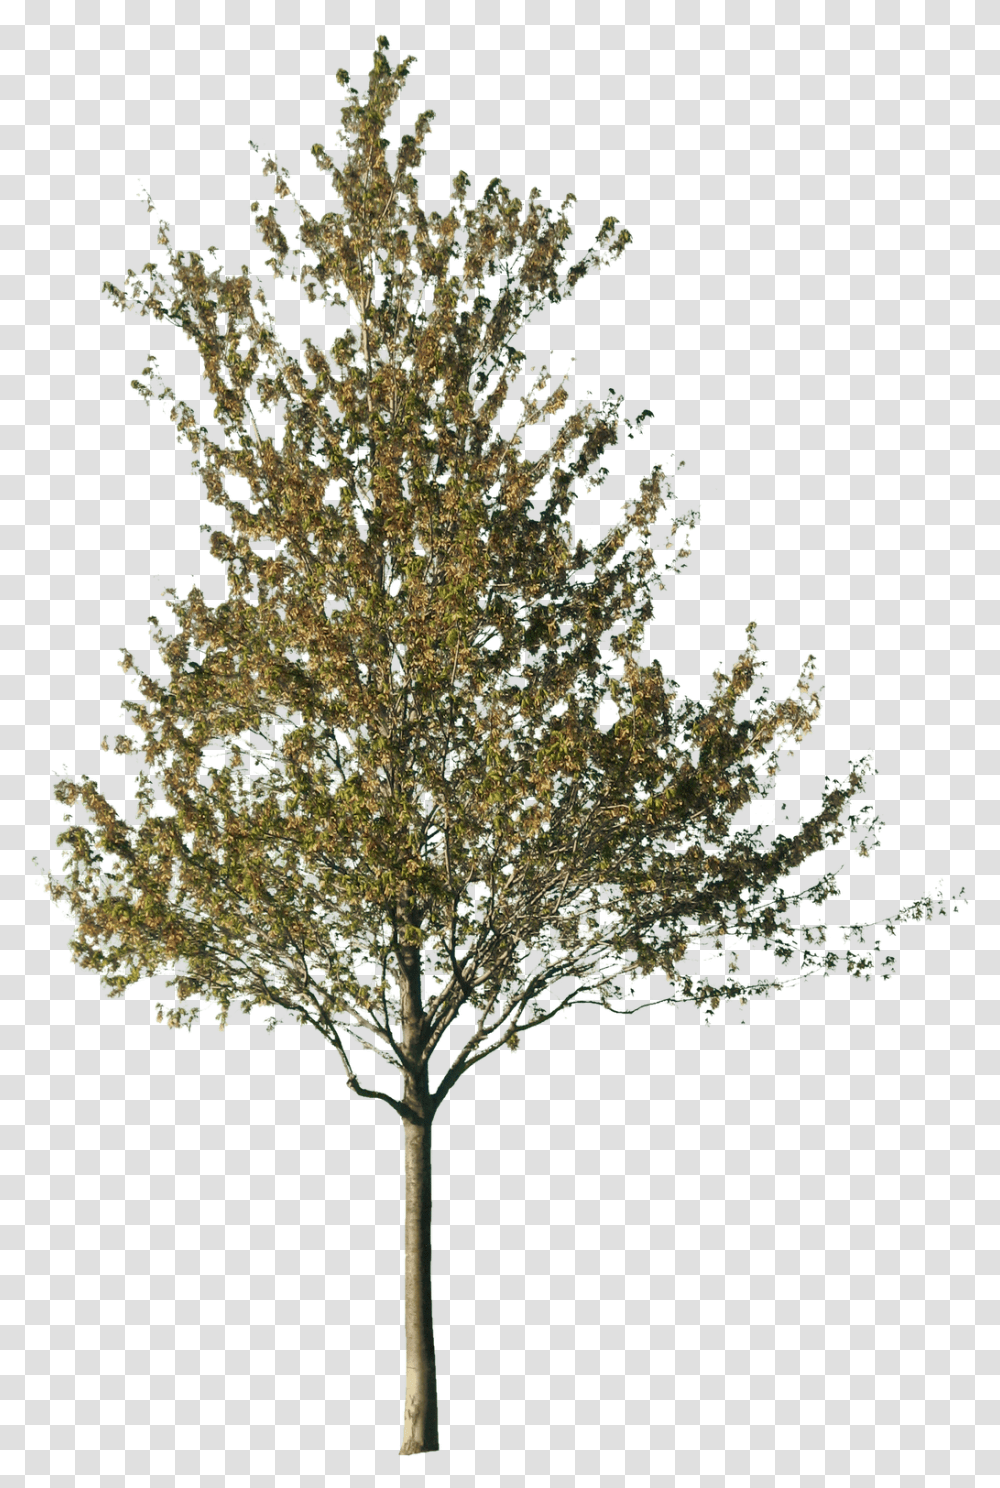 Cut Out Trees & Clipart Free Download Ywd Tree Cut Out, Plant, Conifer, Fir, Abies Transparent Png